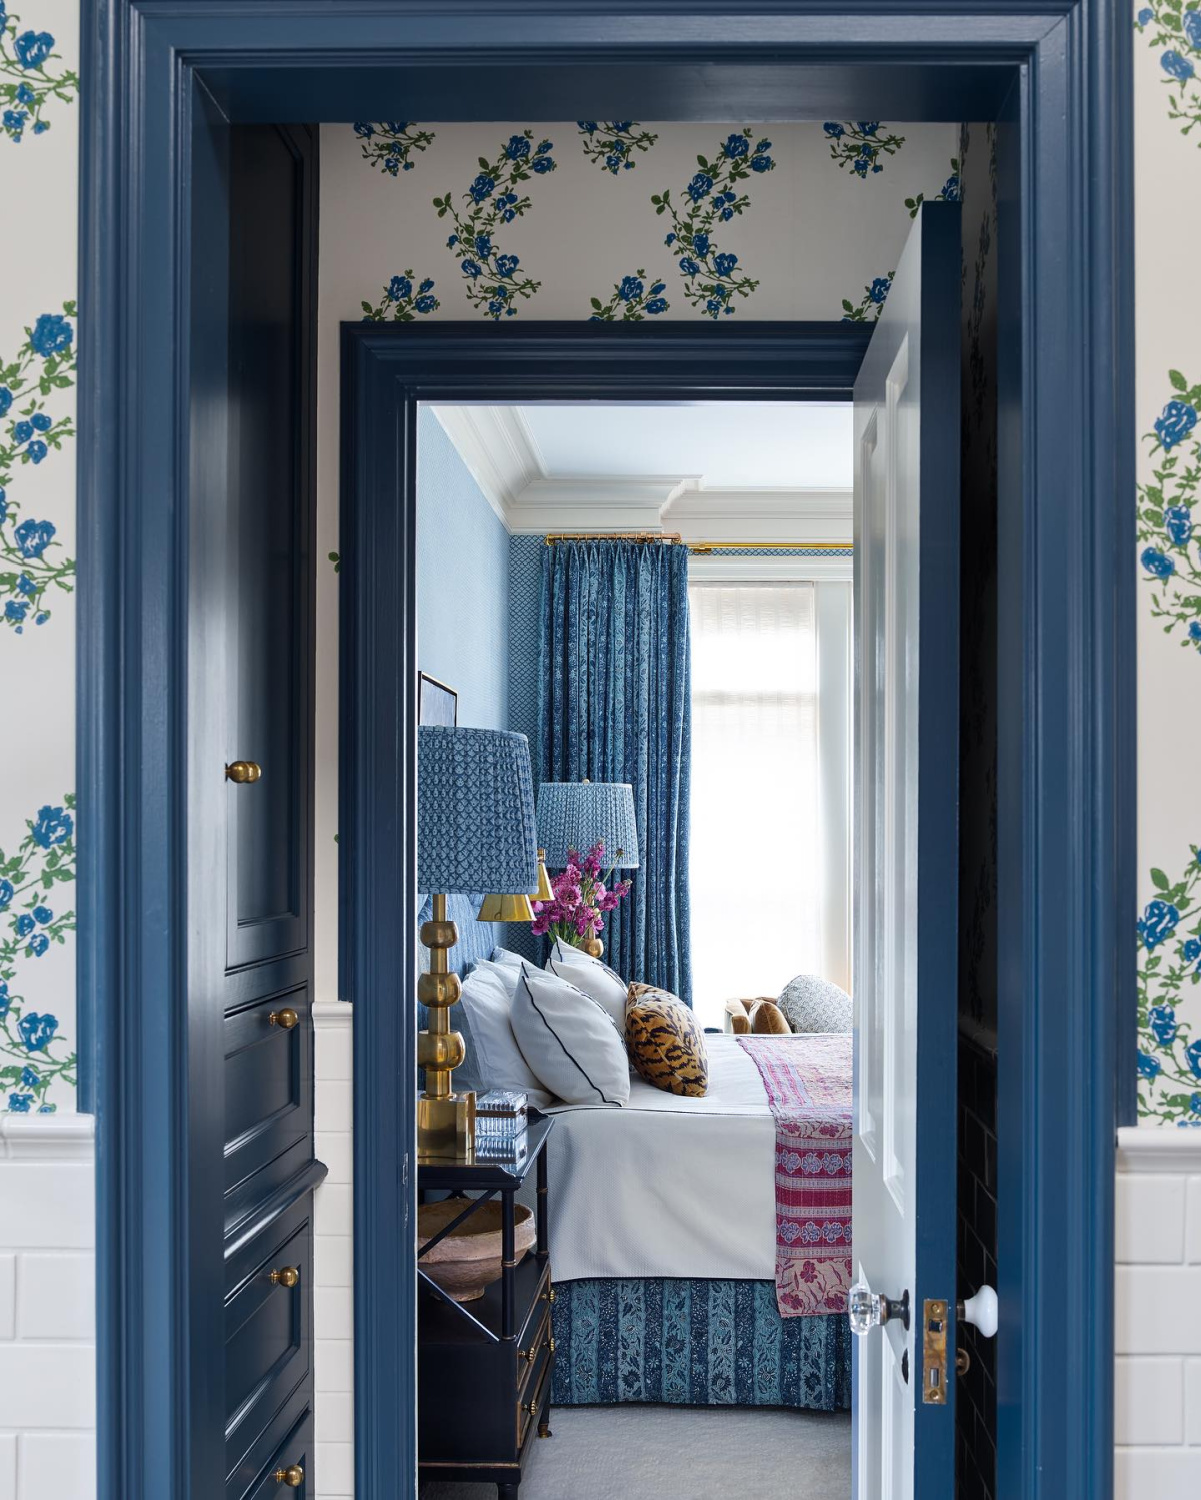 Bedroom with navy blue trim and floral wallpaper - Summer Thornton Design.